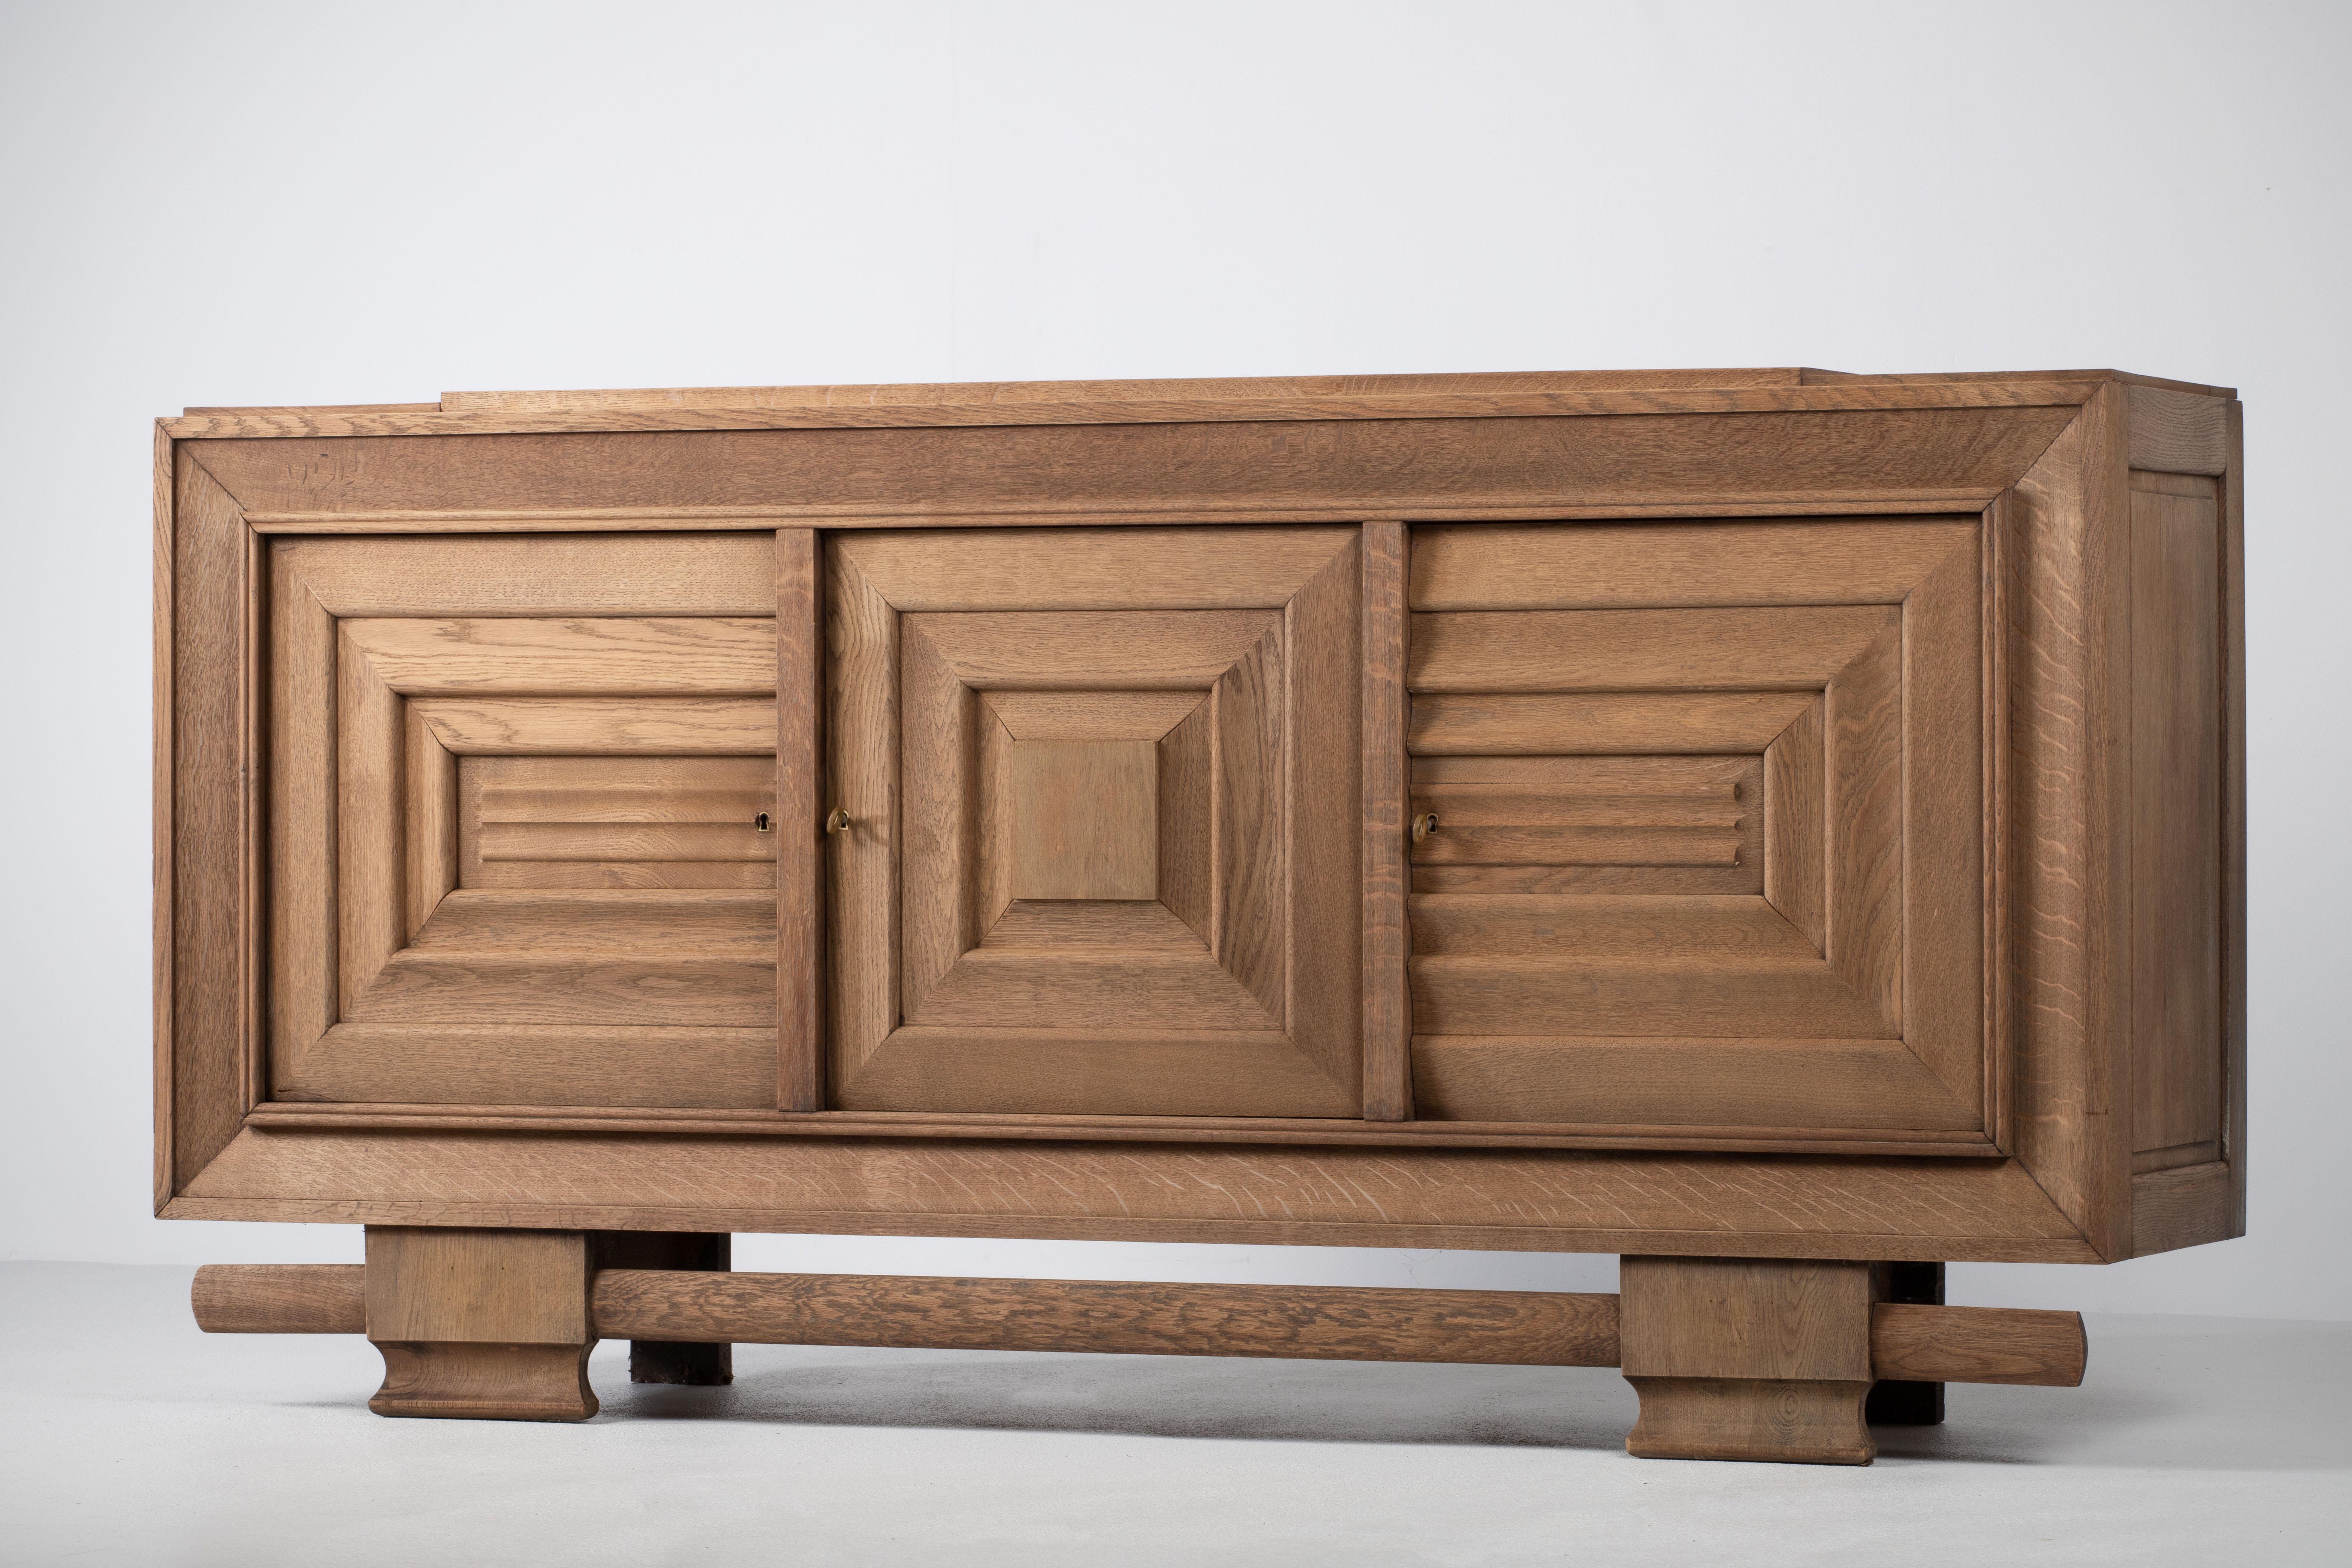 Credenza, solid oak, France, 1940s, attributed to Charles Dudouyt.
Large Art Deco Brutalist sideboard. 
The credenza consists of three storage facilities and covered with very detailed designed door panels. 
The refined wooden structures on the